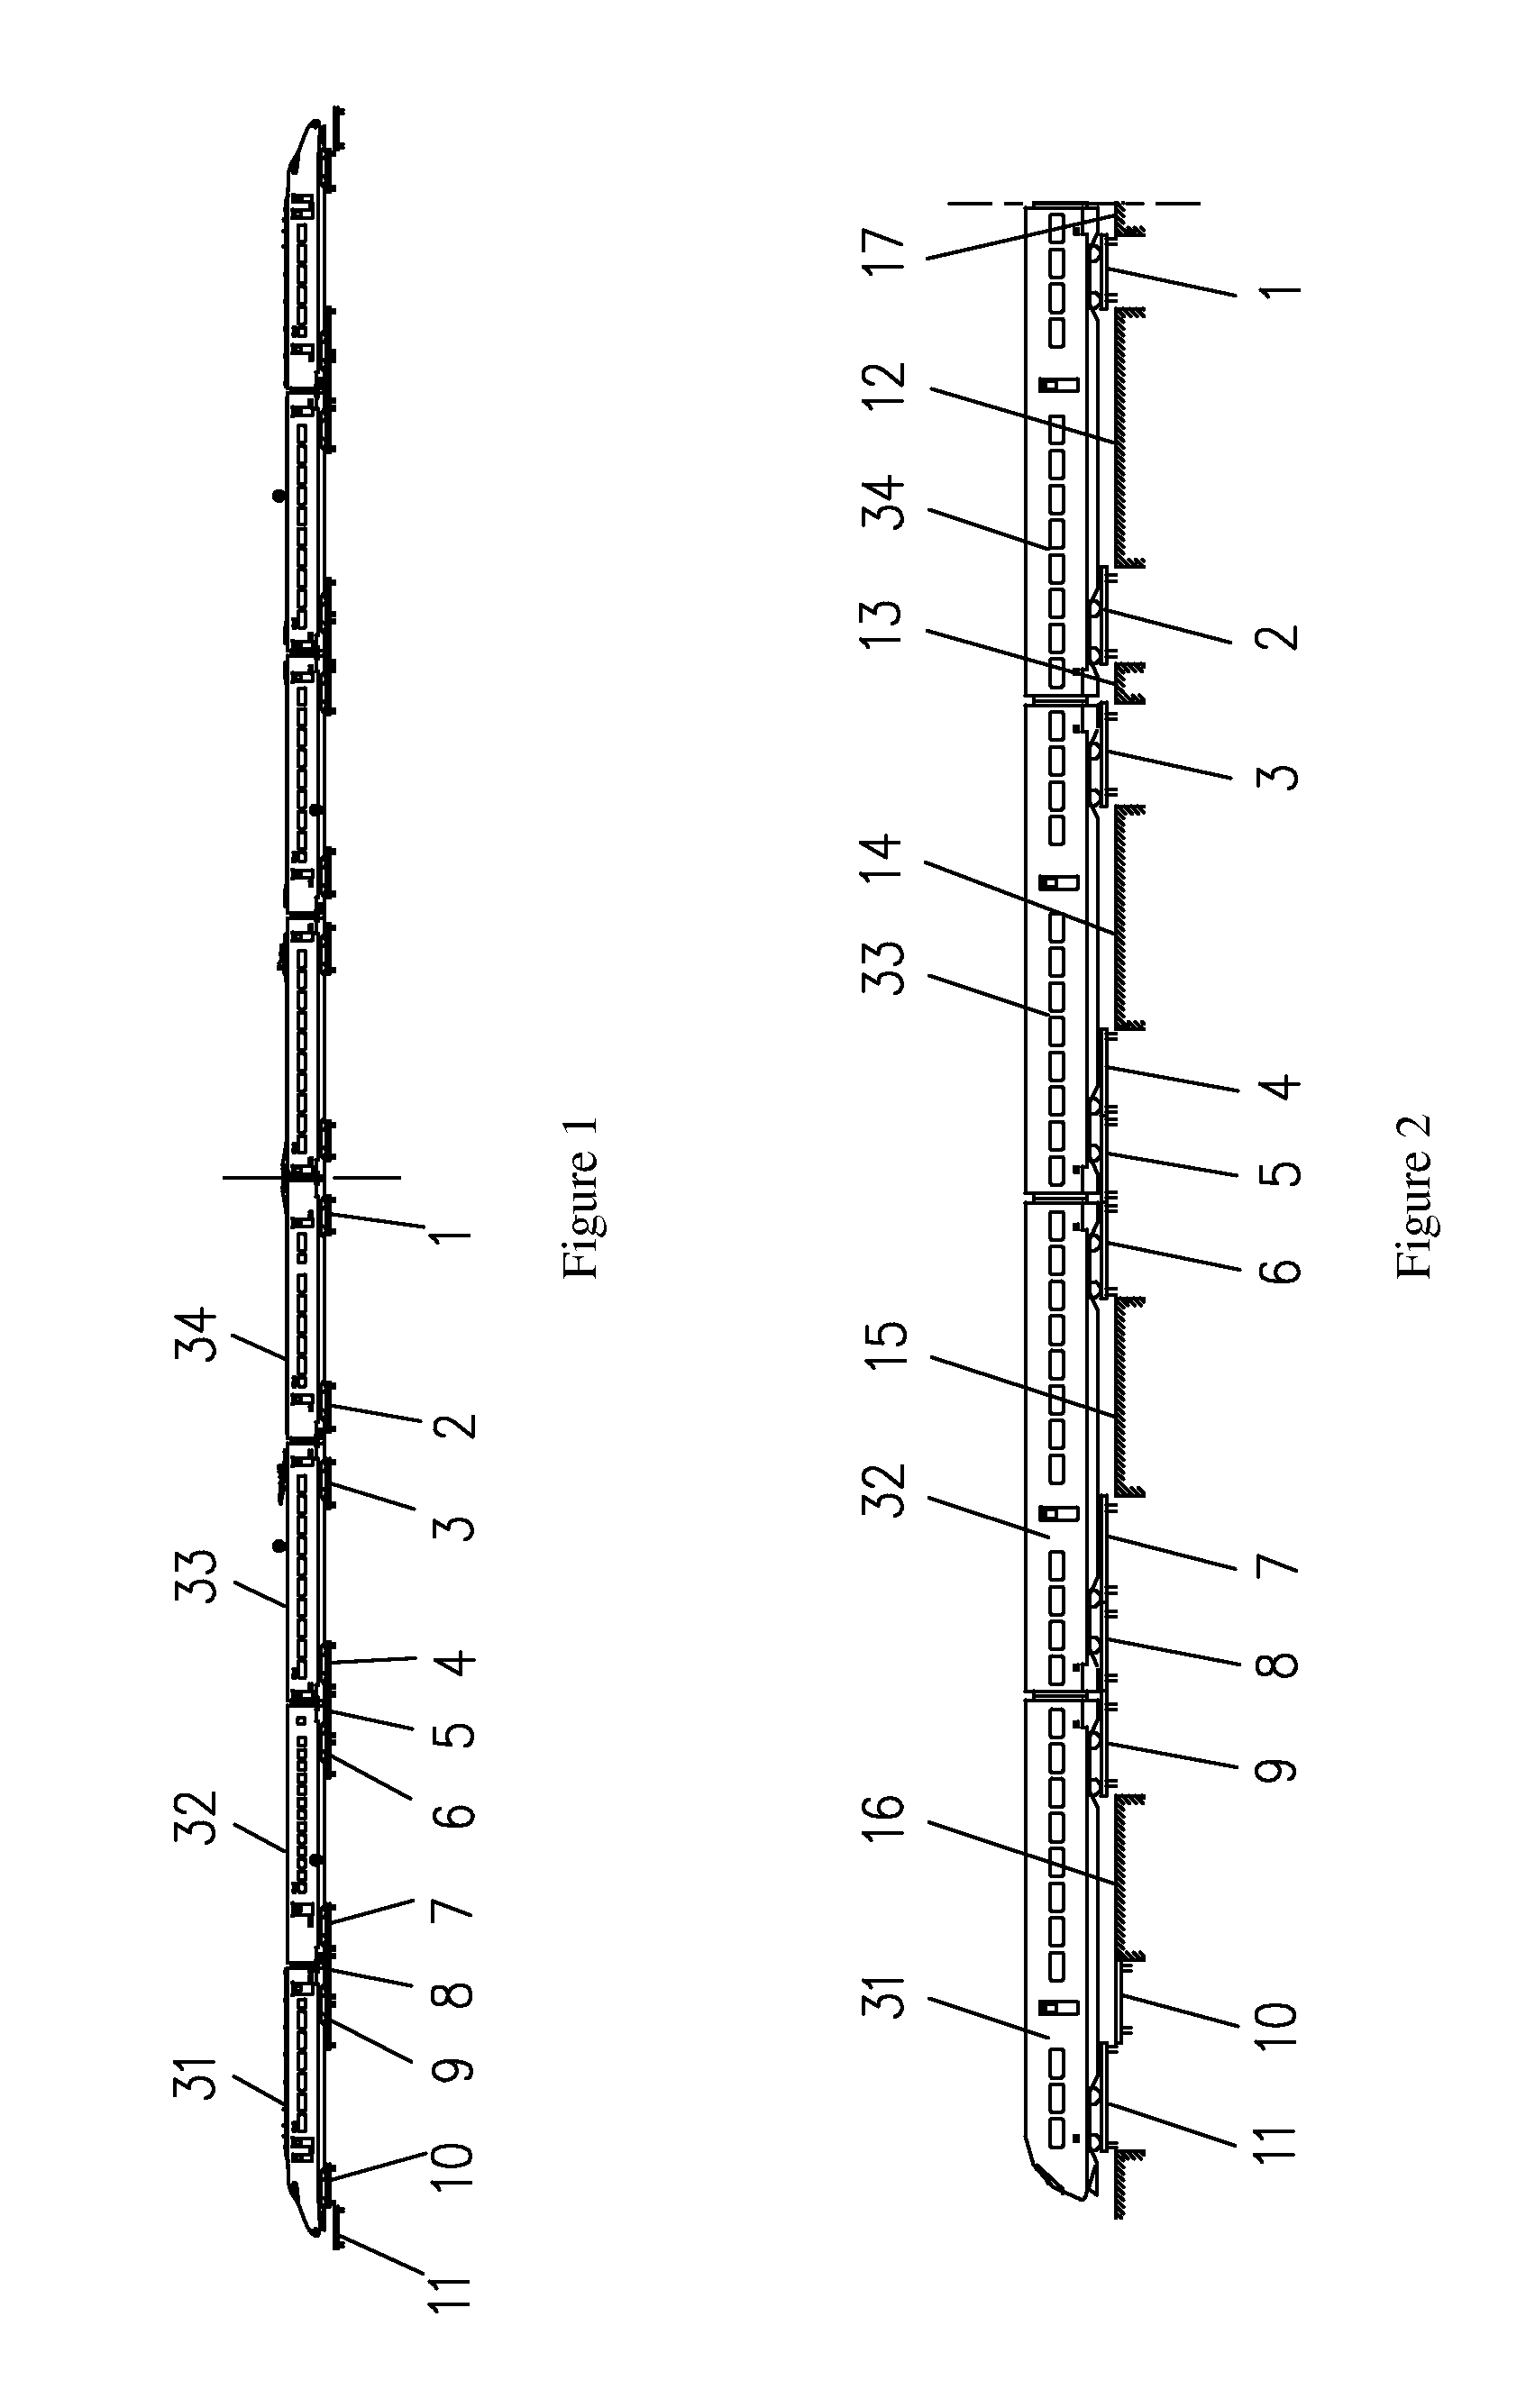 Under-floor lifting jack for high-speed electric multiple unit trainset